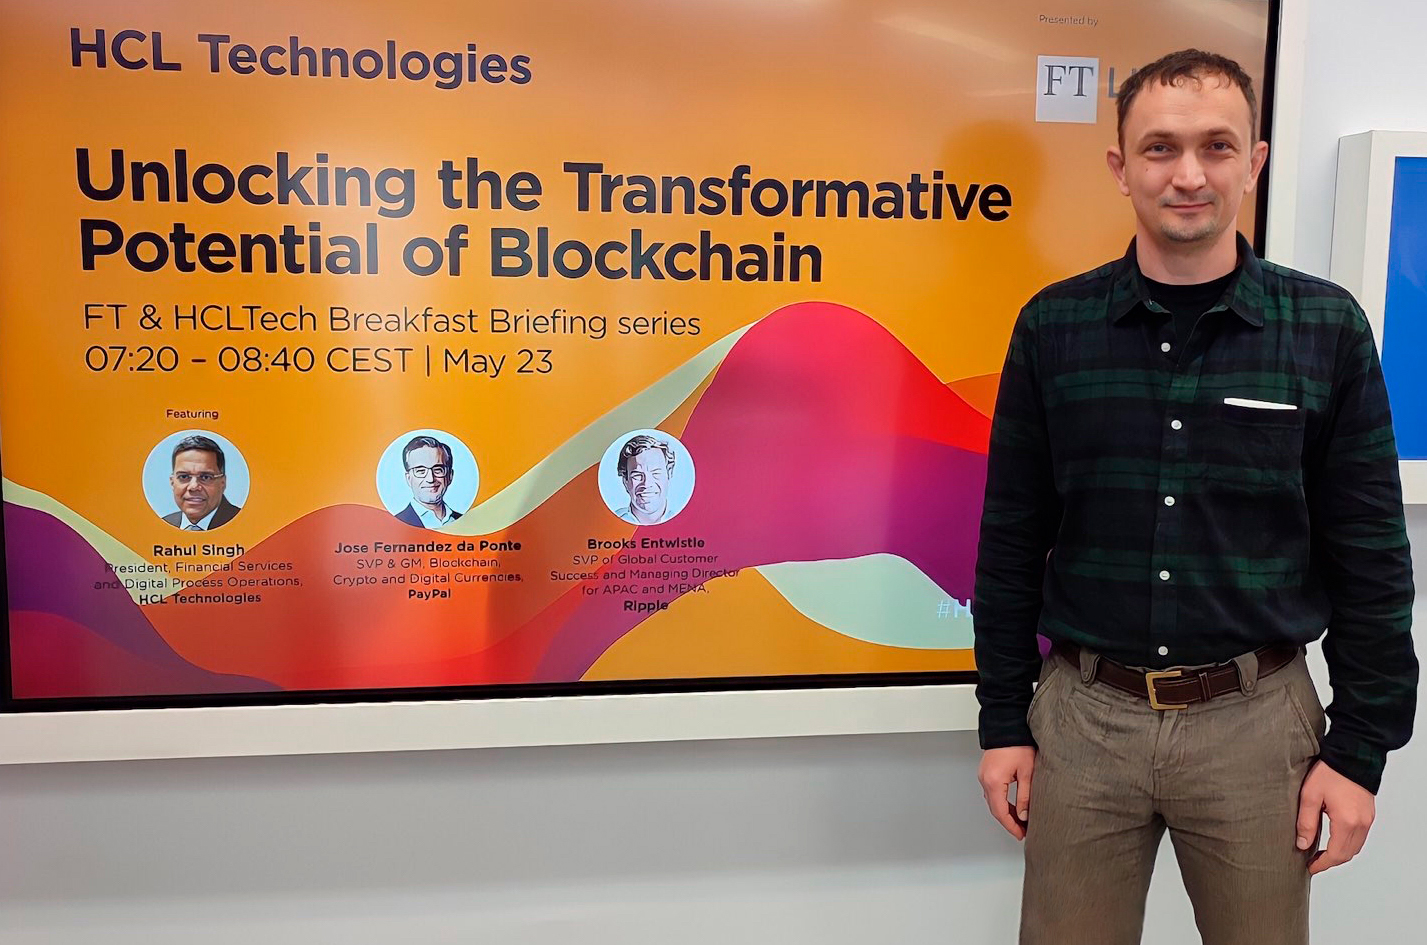 The business breakfast "Unlocking the transformative potential of blockchain"